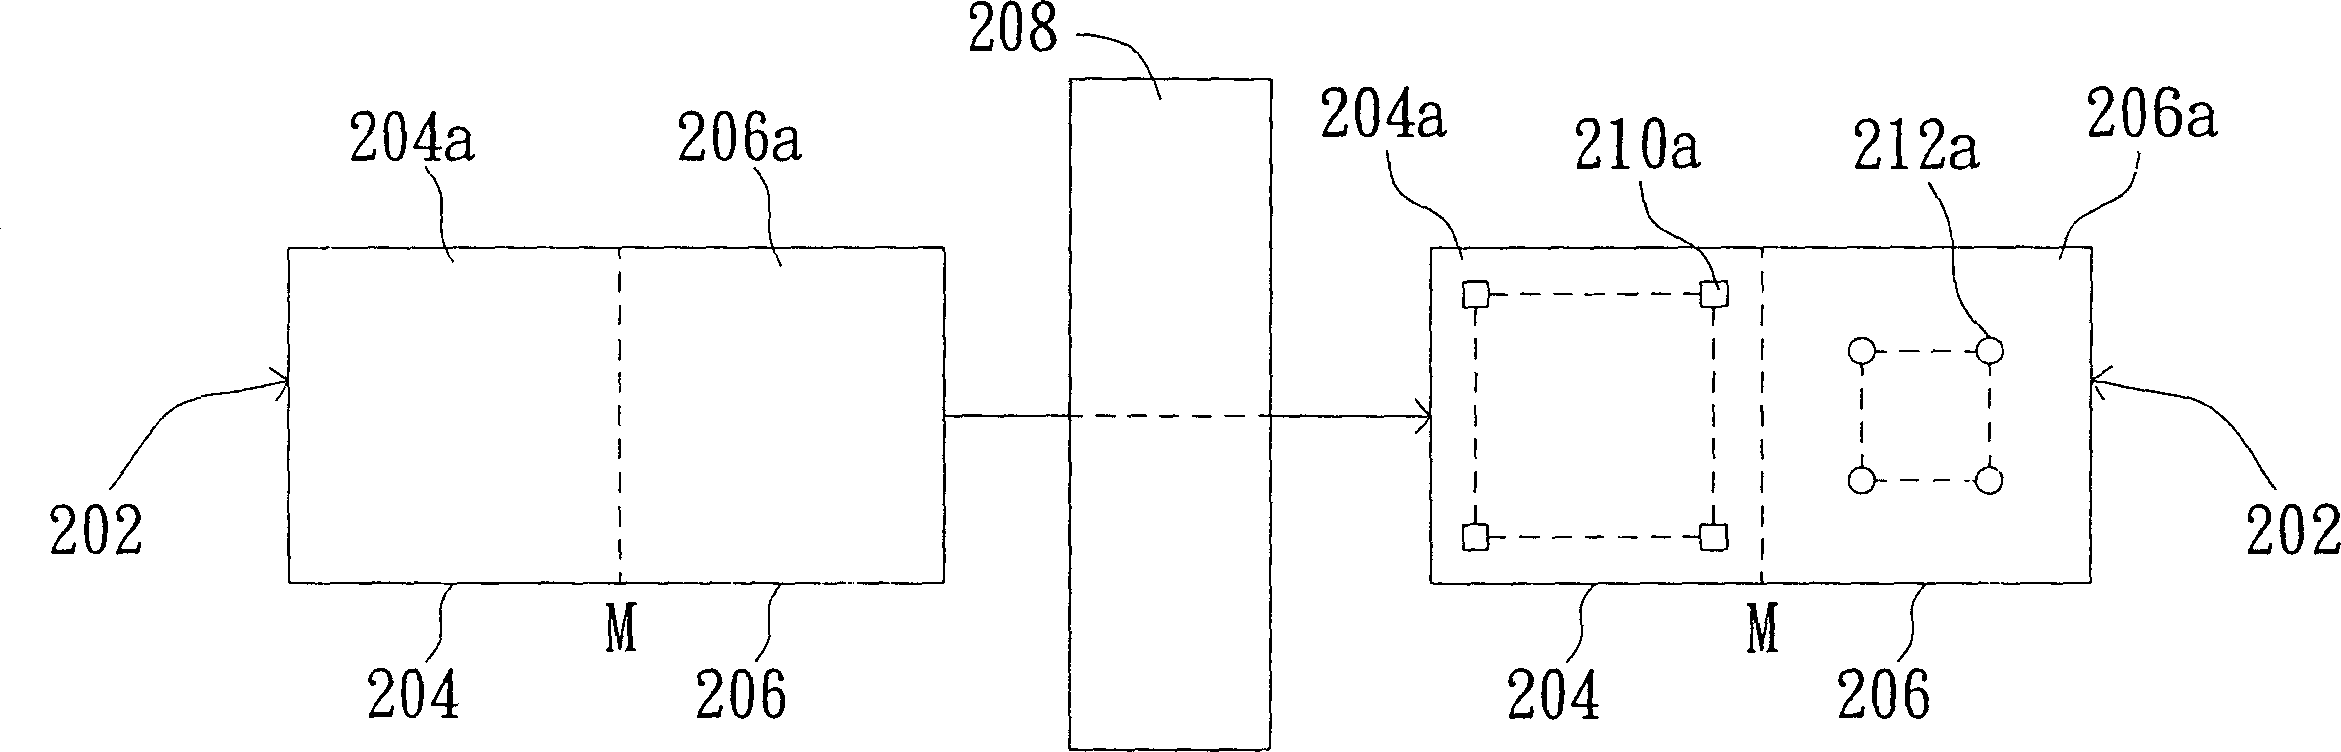 Element assembling methodfor connecting board of circuitboard